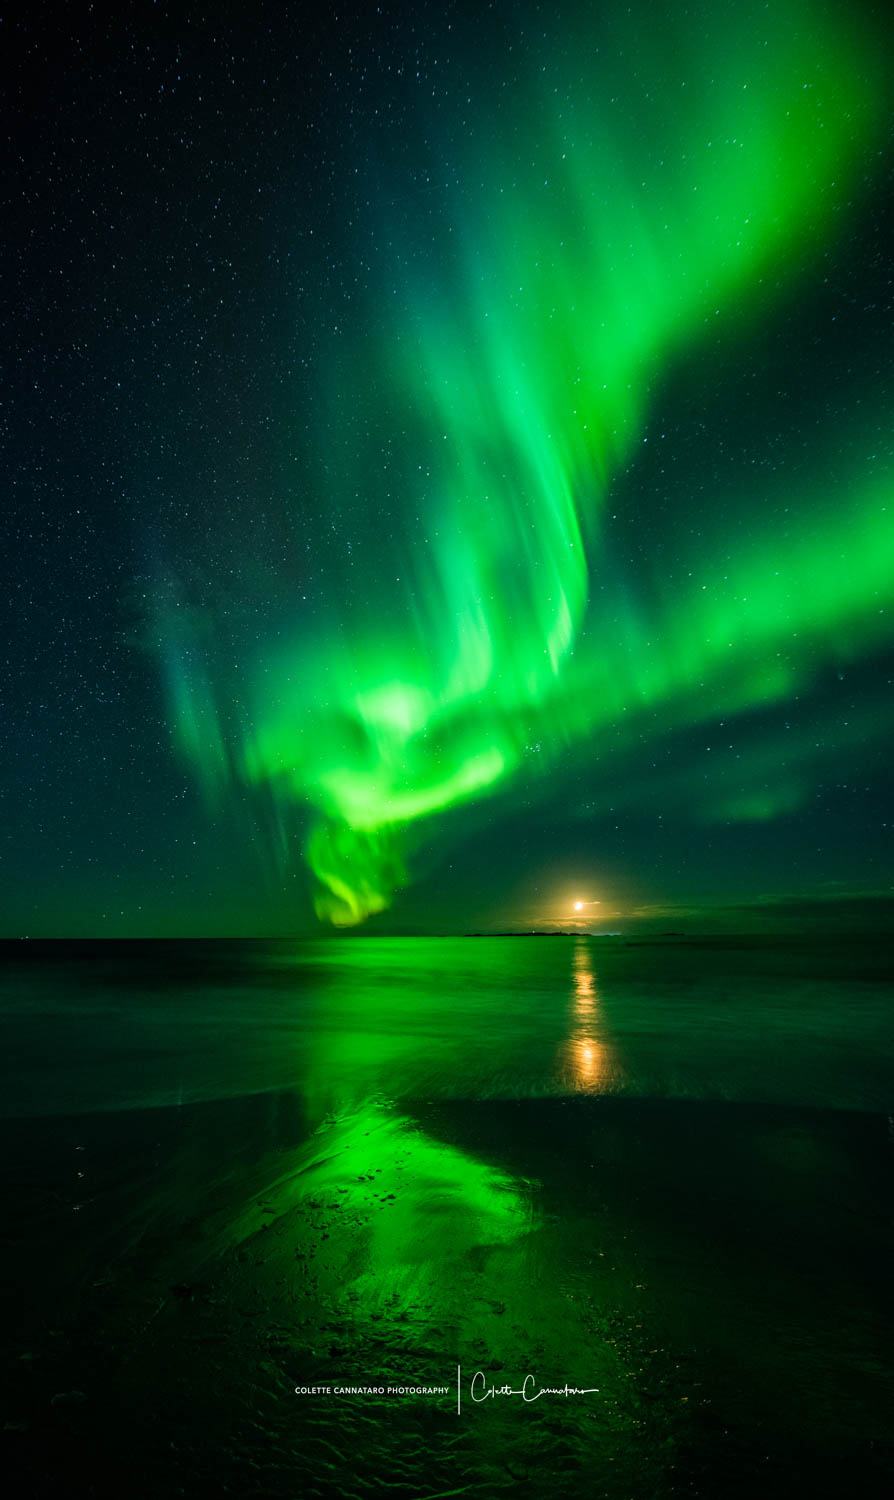 The Northern Lights and full moon reflecting over the sea and beach.